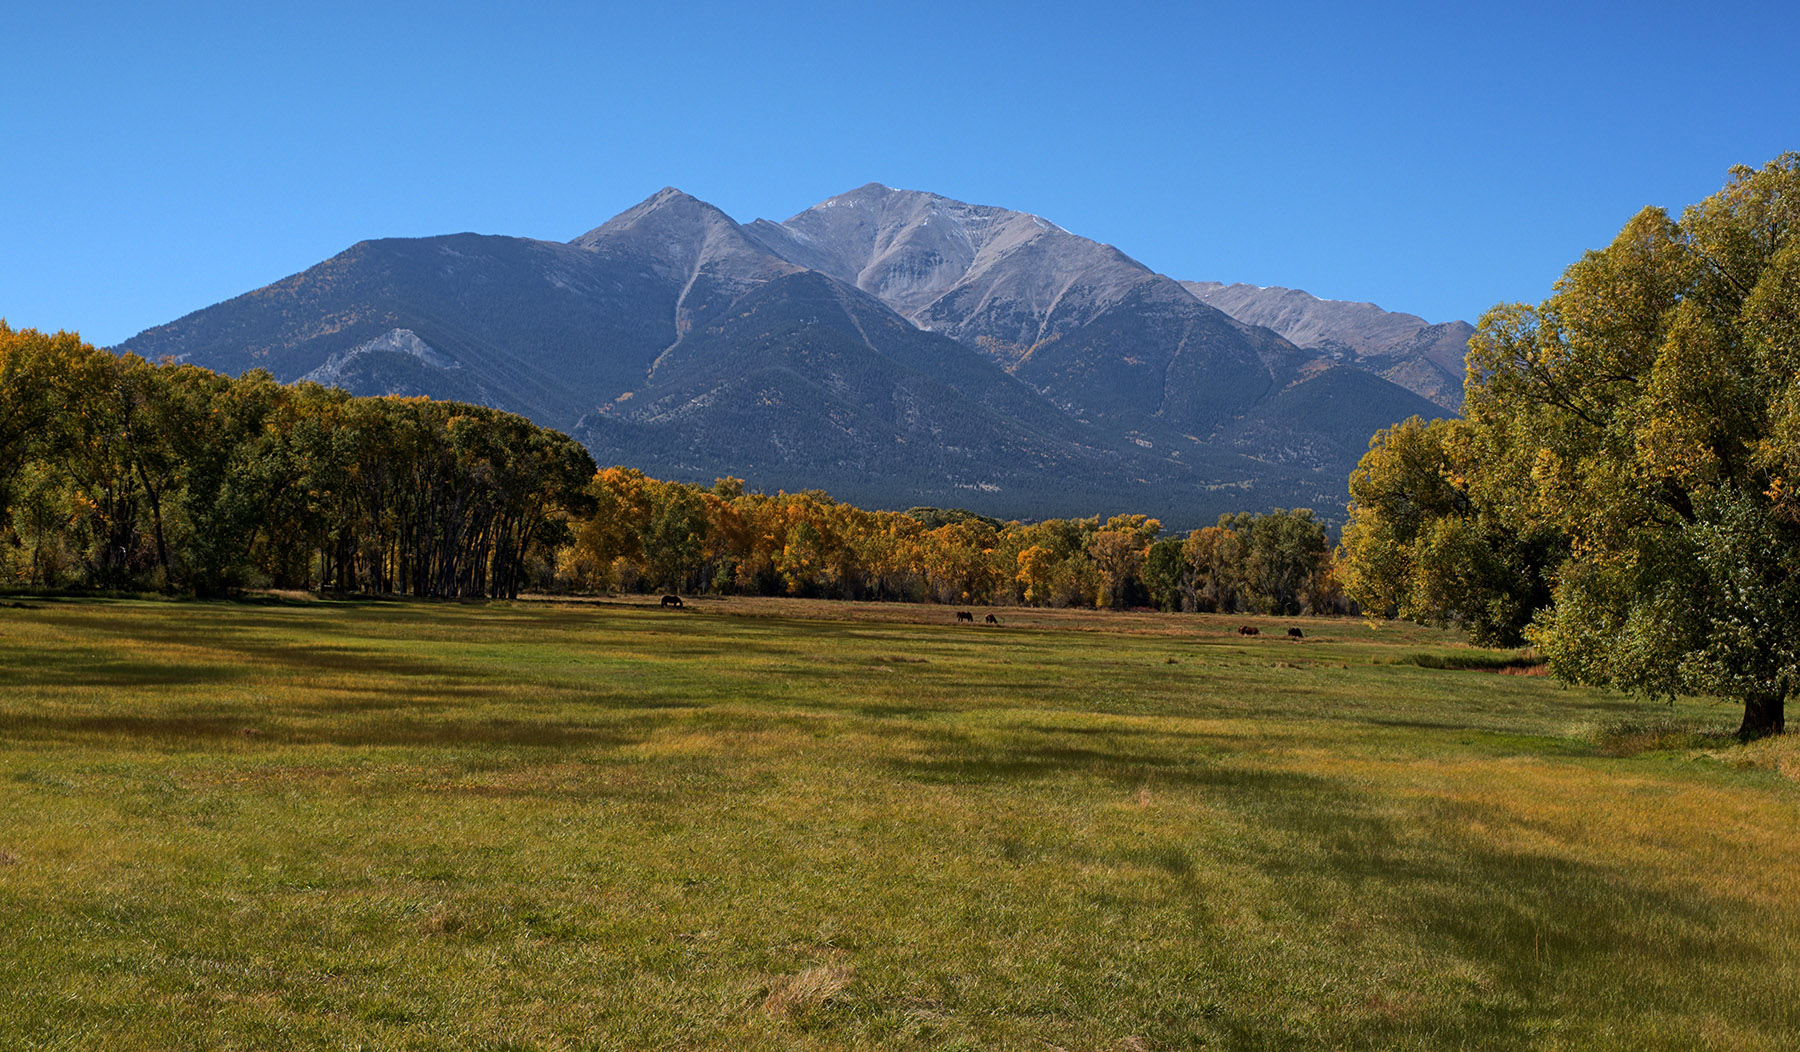 Mt. Princeton, horse pasture and cottonwood trees near Buena Vista CO.  Mt. Princeton is in the Collegiate Range which is the southern-most end of the Sawatch Range.  Peaks are composed of Precambrian gneiss, schist and granite.